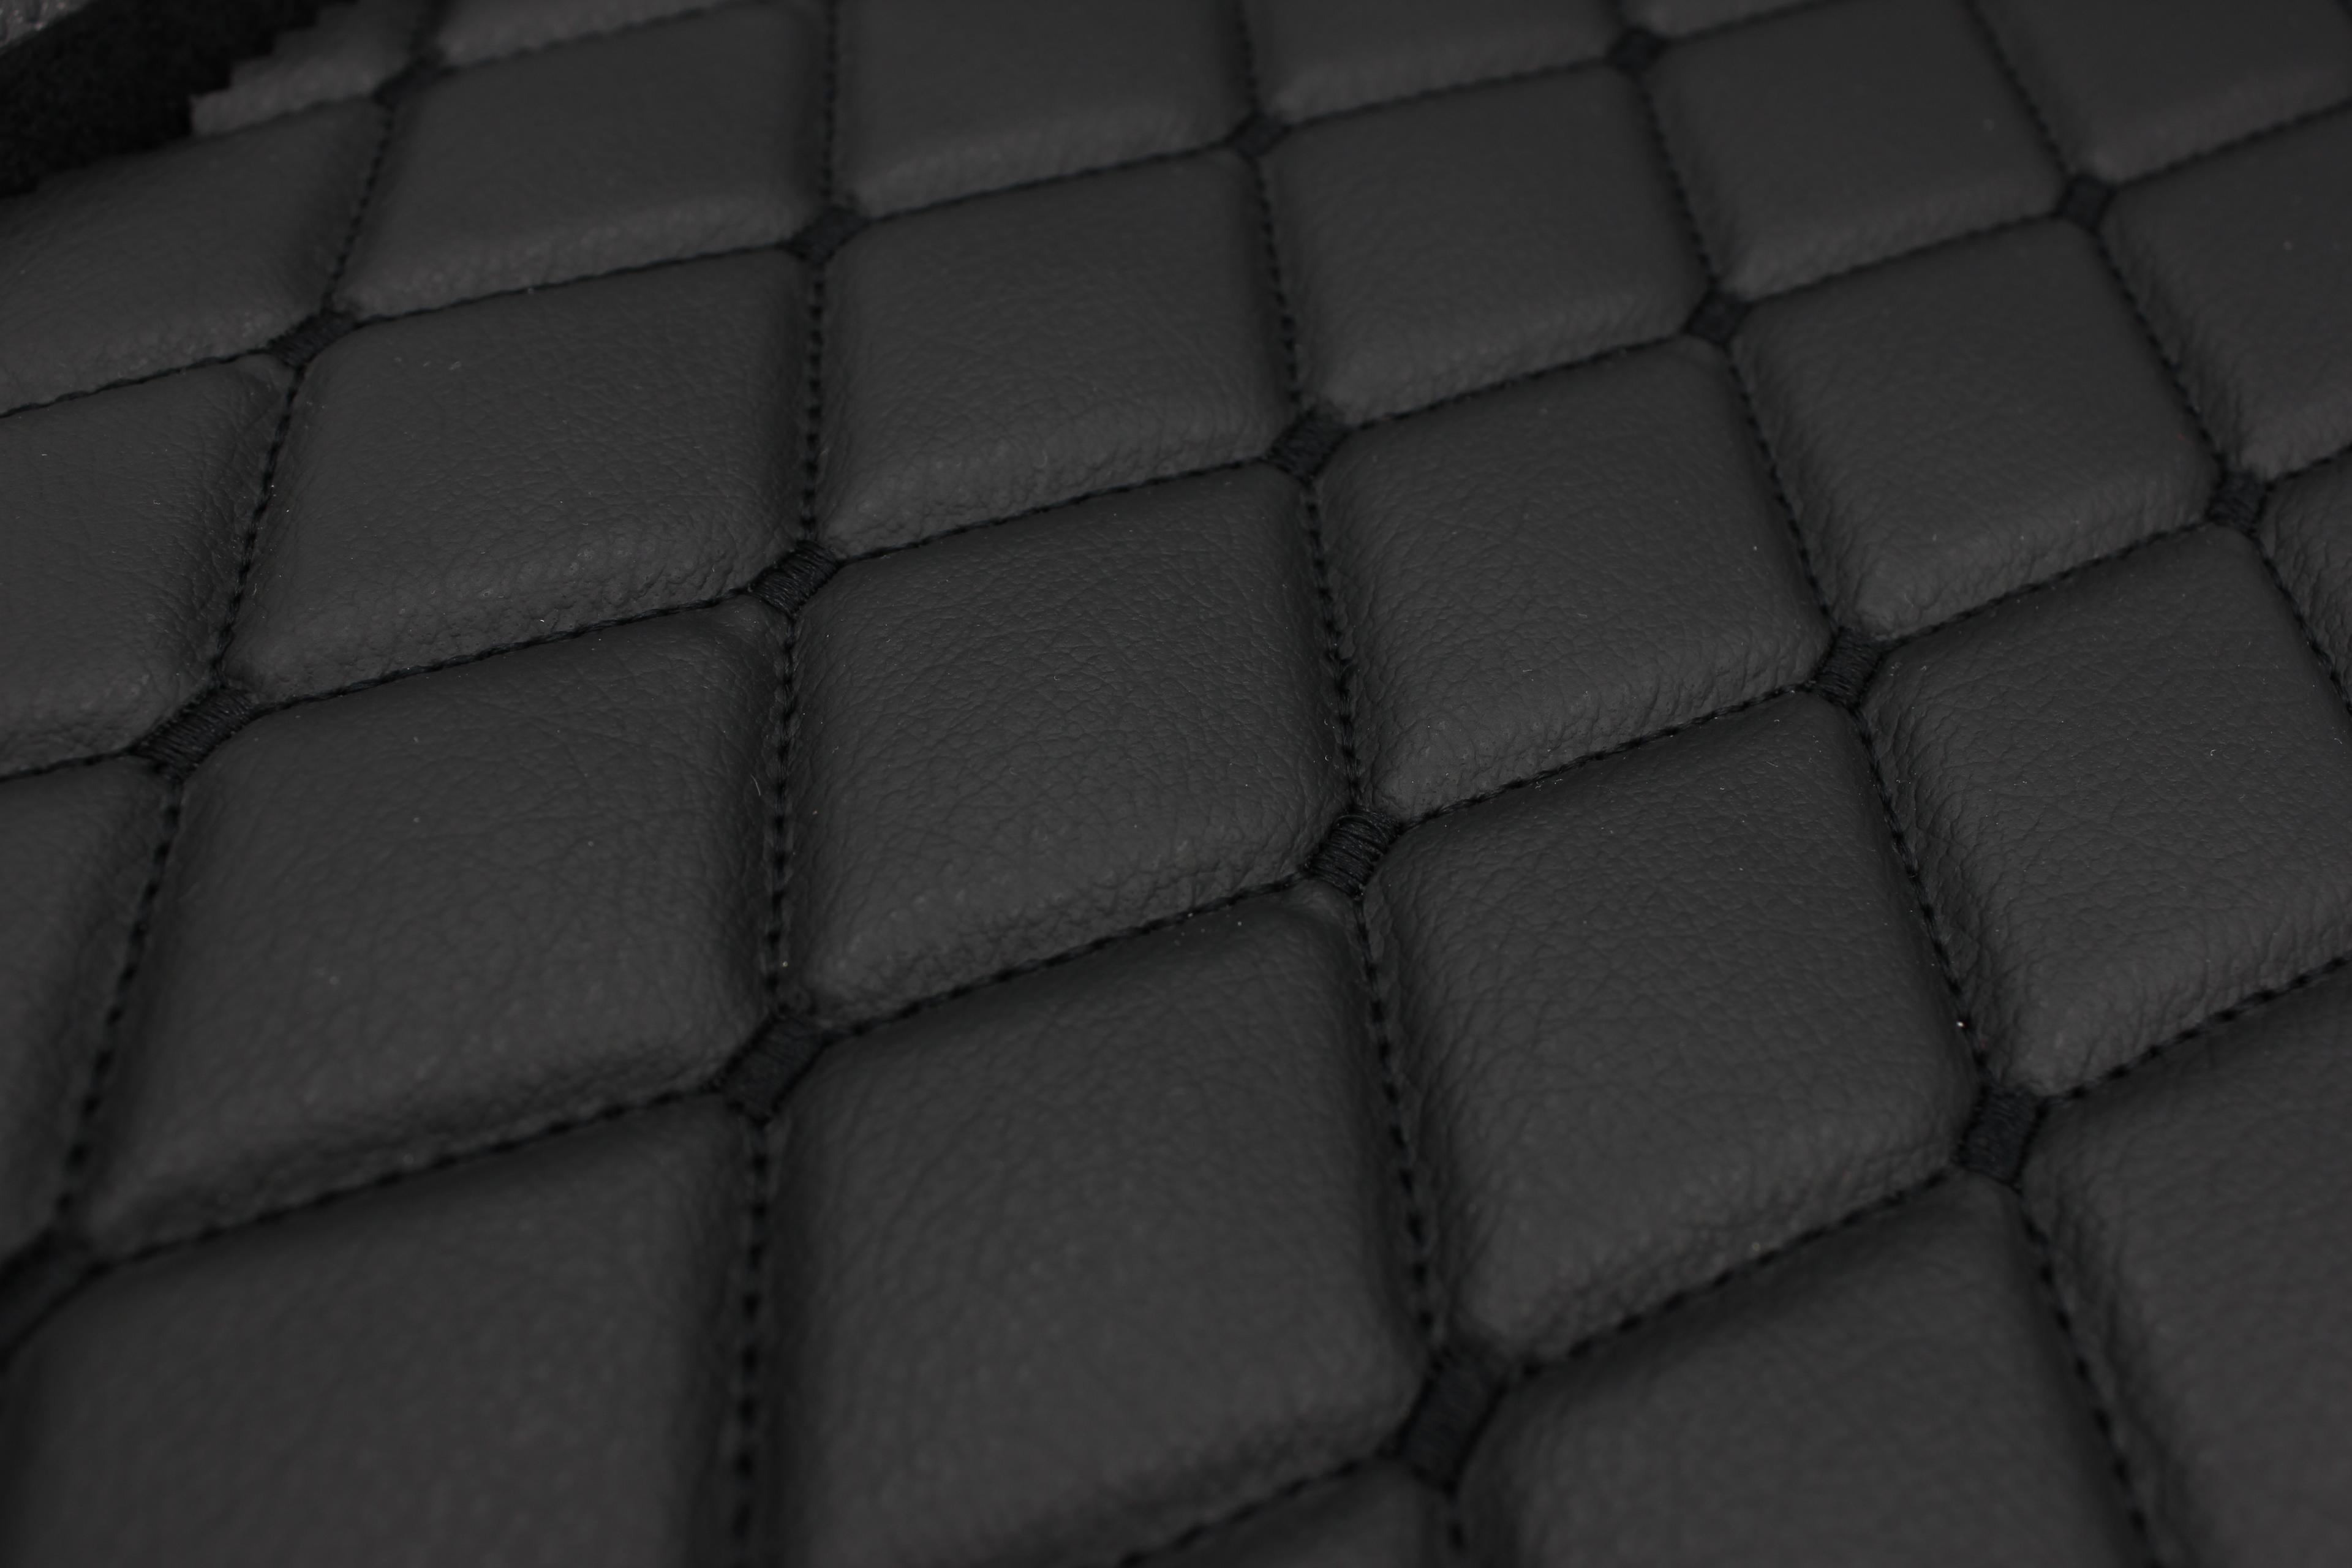 Black Quilted Black Vinyl Grain Faux Leather Car Upholstery Fabric | 2"x3" - 5x8cm Diamond Stitch with Foam | 140cm & 55.1" Wide | Artificial Leather